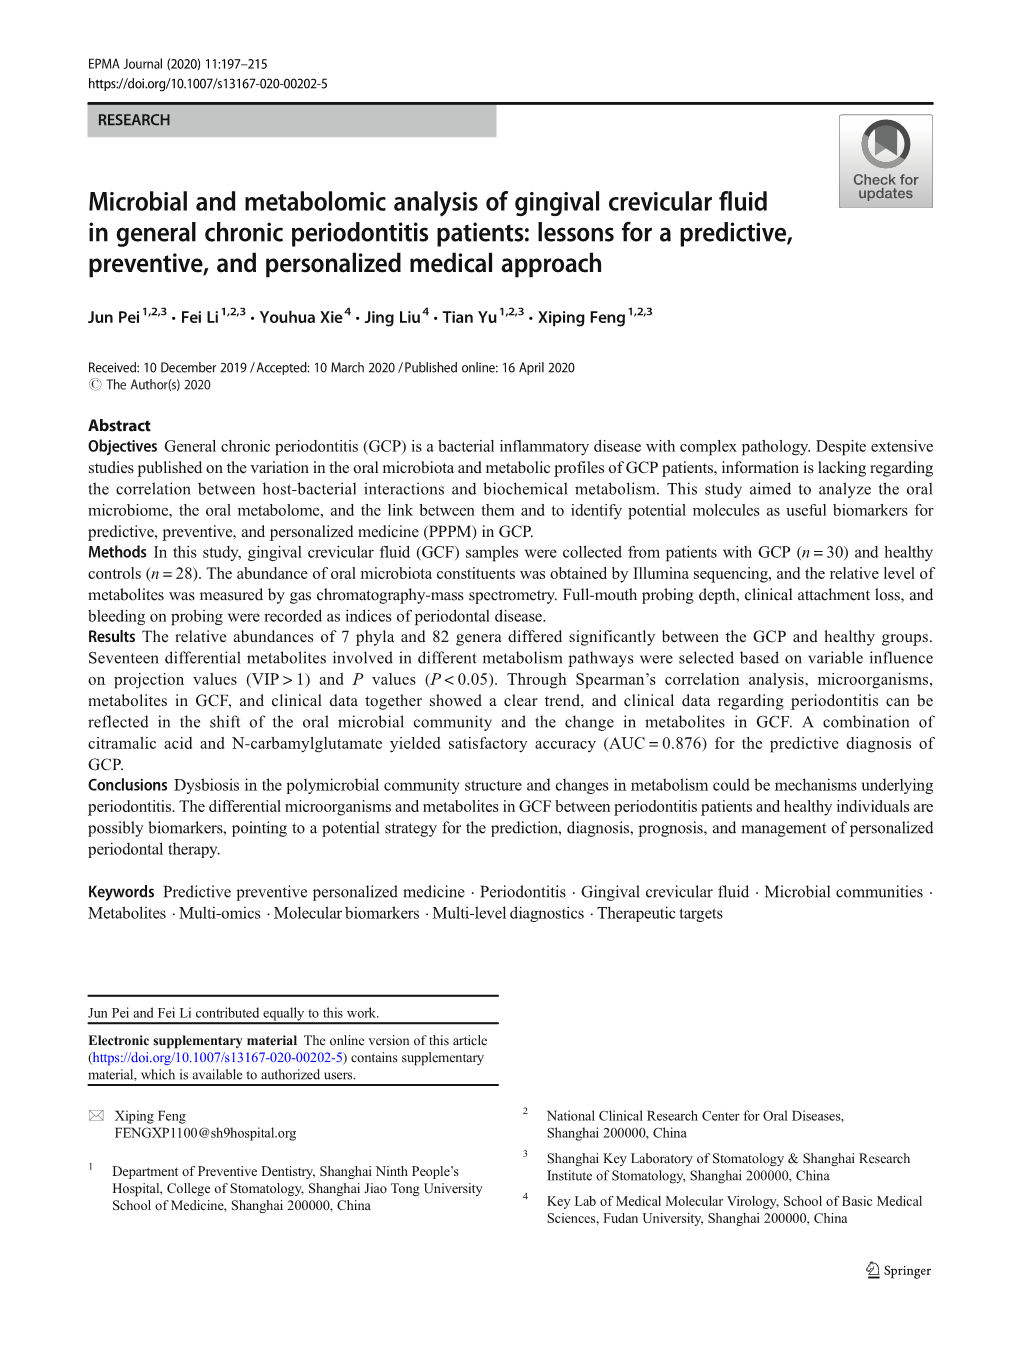 Microbial and Metabolomic Analysis of Gingival Crevicular Fluid in General Chronic Periodontitis Patients: Lessons for a Predict